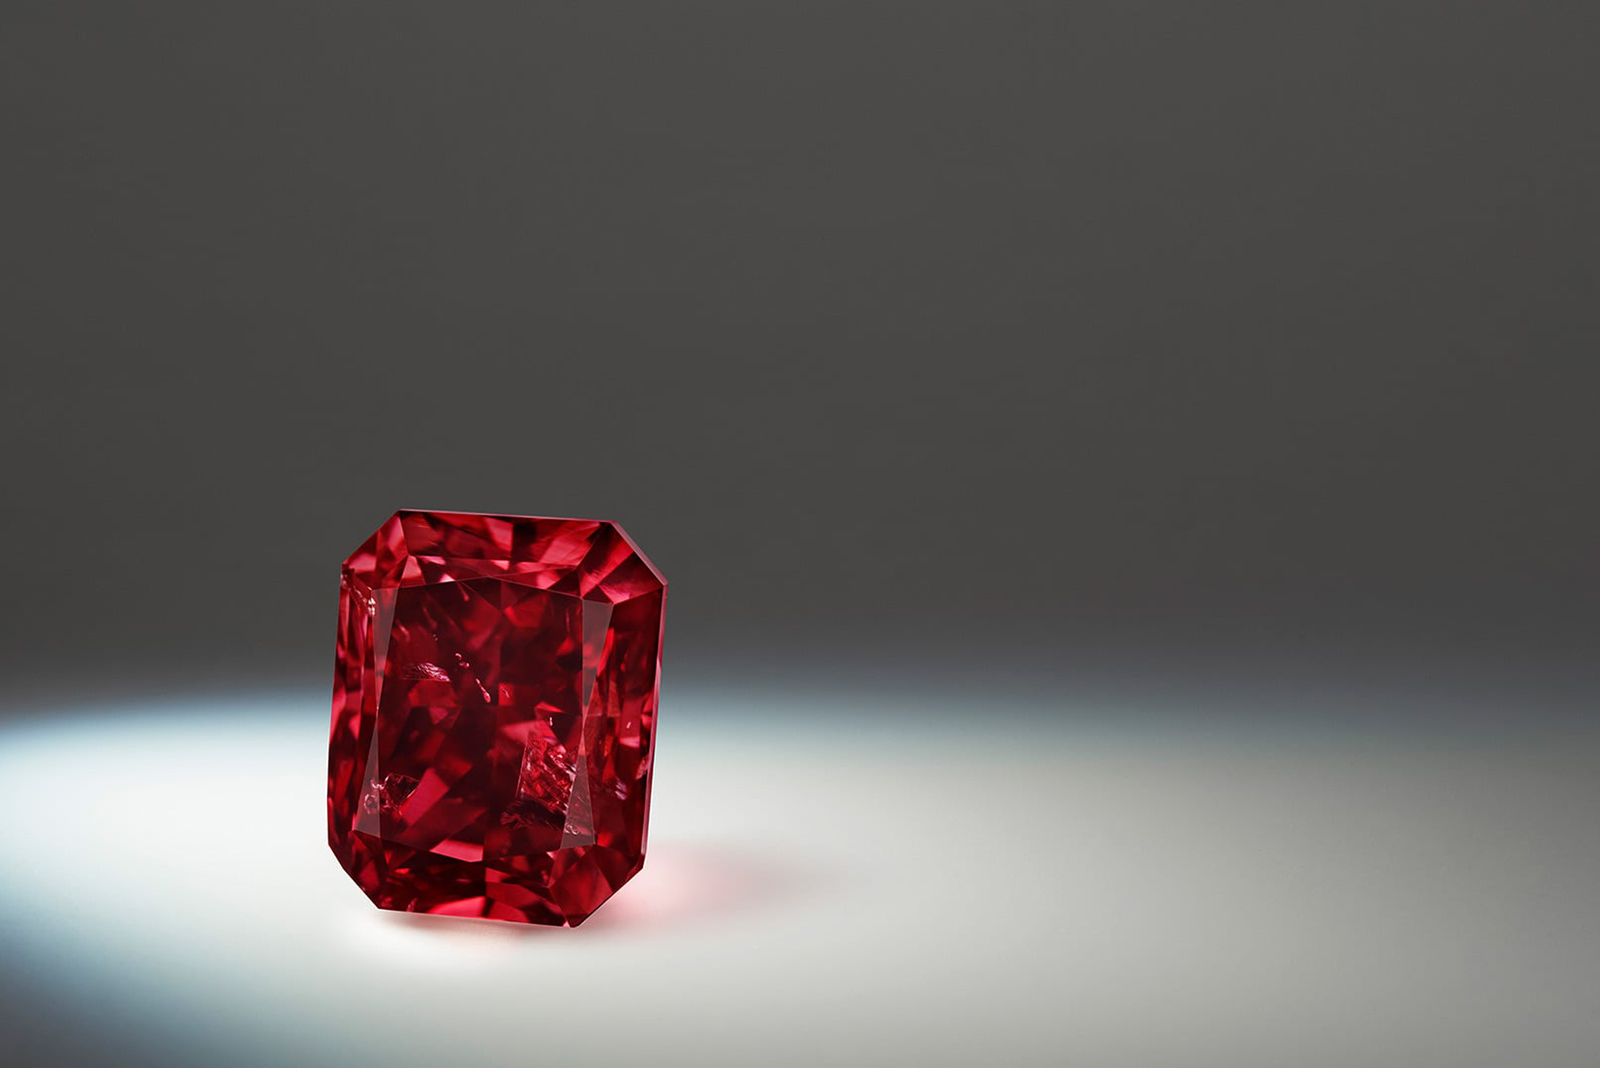 Lot 5 in the final Argle Pink Diamond Tender is the Argyle Bohème, a radiant-shaped fancy red diamond of 1.01 carats